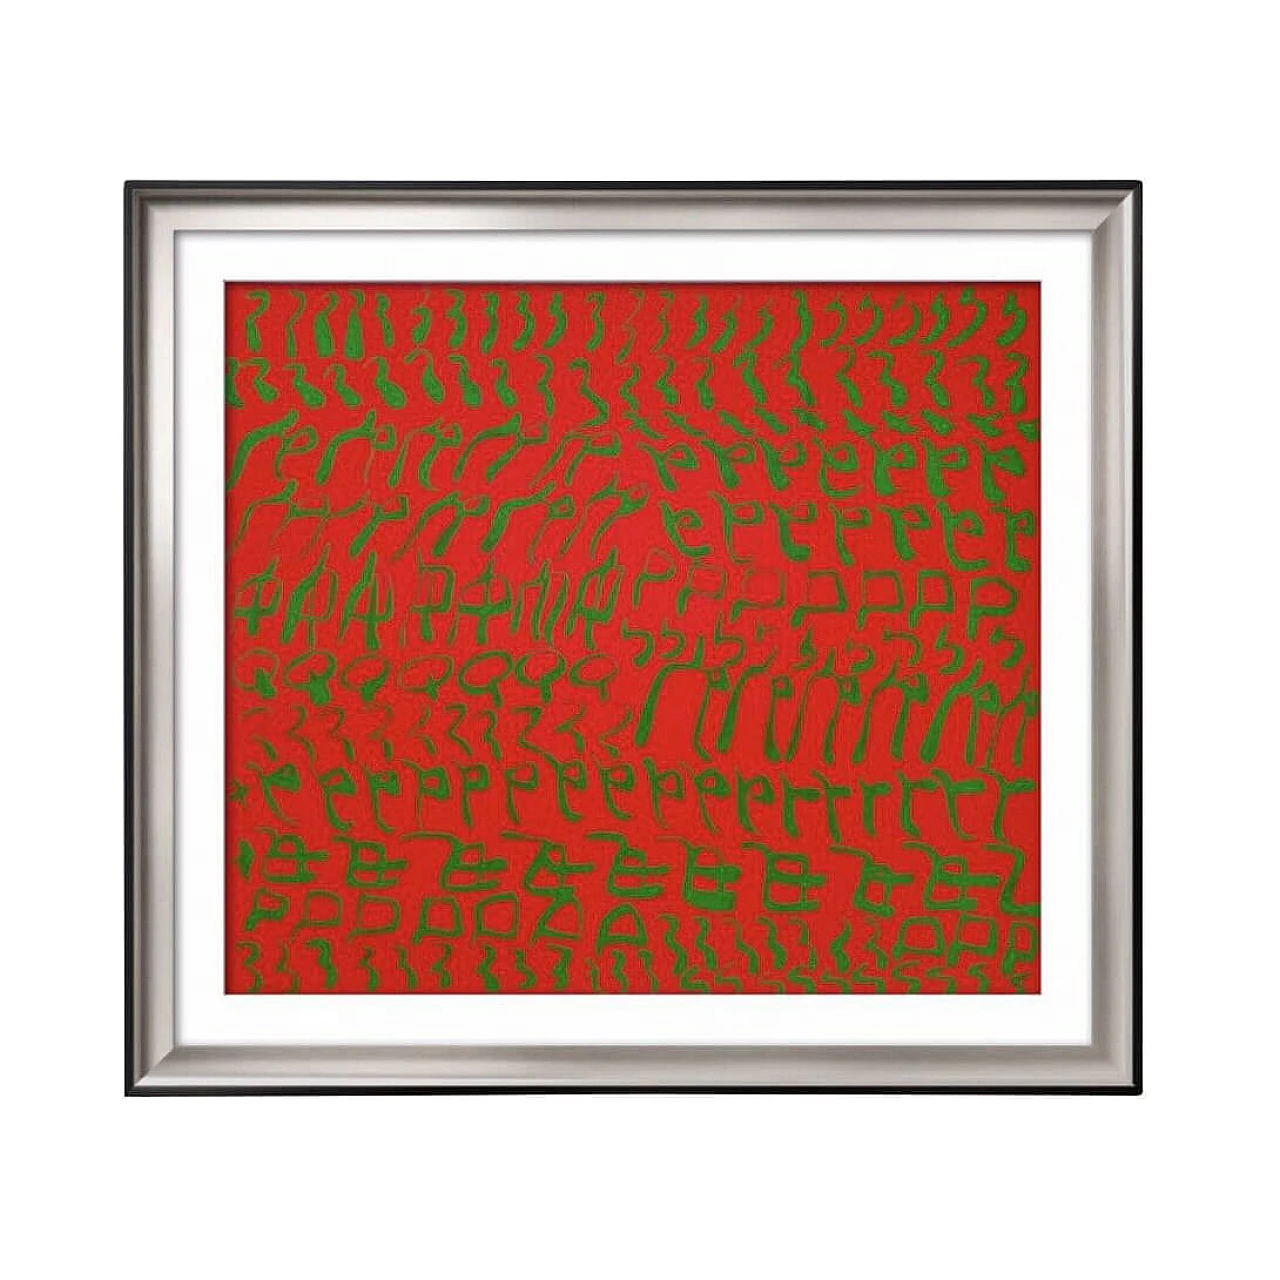 Serigraph on Red and Green cardboard by Carla Accardi, 1986 1257328